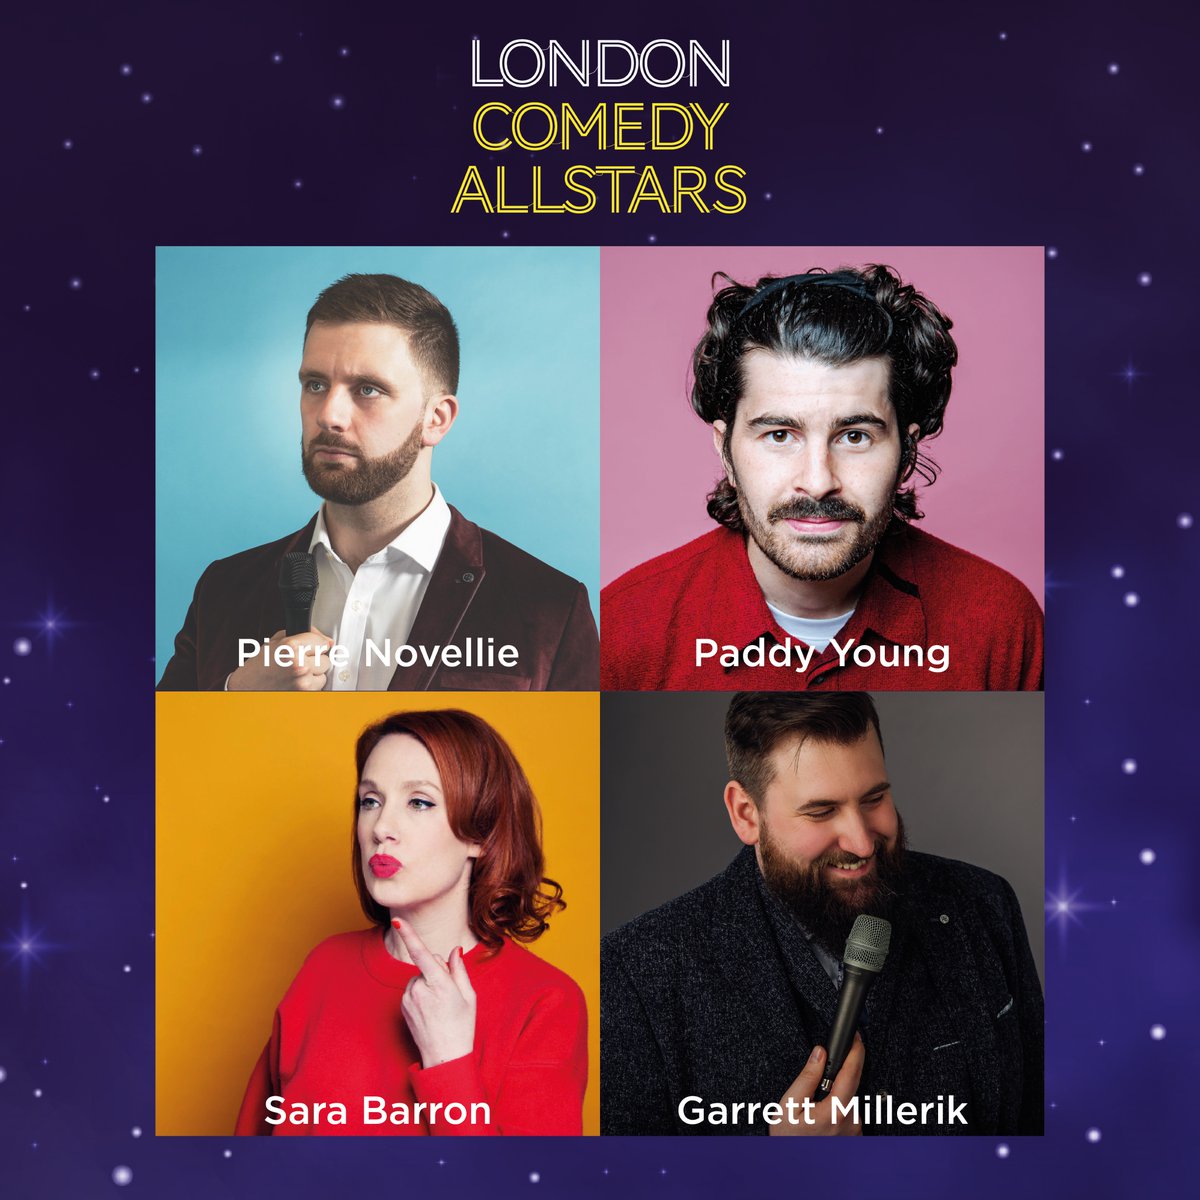 Join us THIS Thursday at 7.15pm for the next installment of London Comedy Allstars. Take a look at the amazing lineup we have in store! 🎟️ tinyurl.com/mvhnskwv